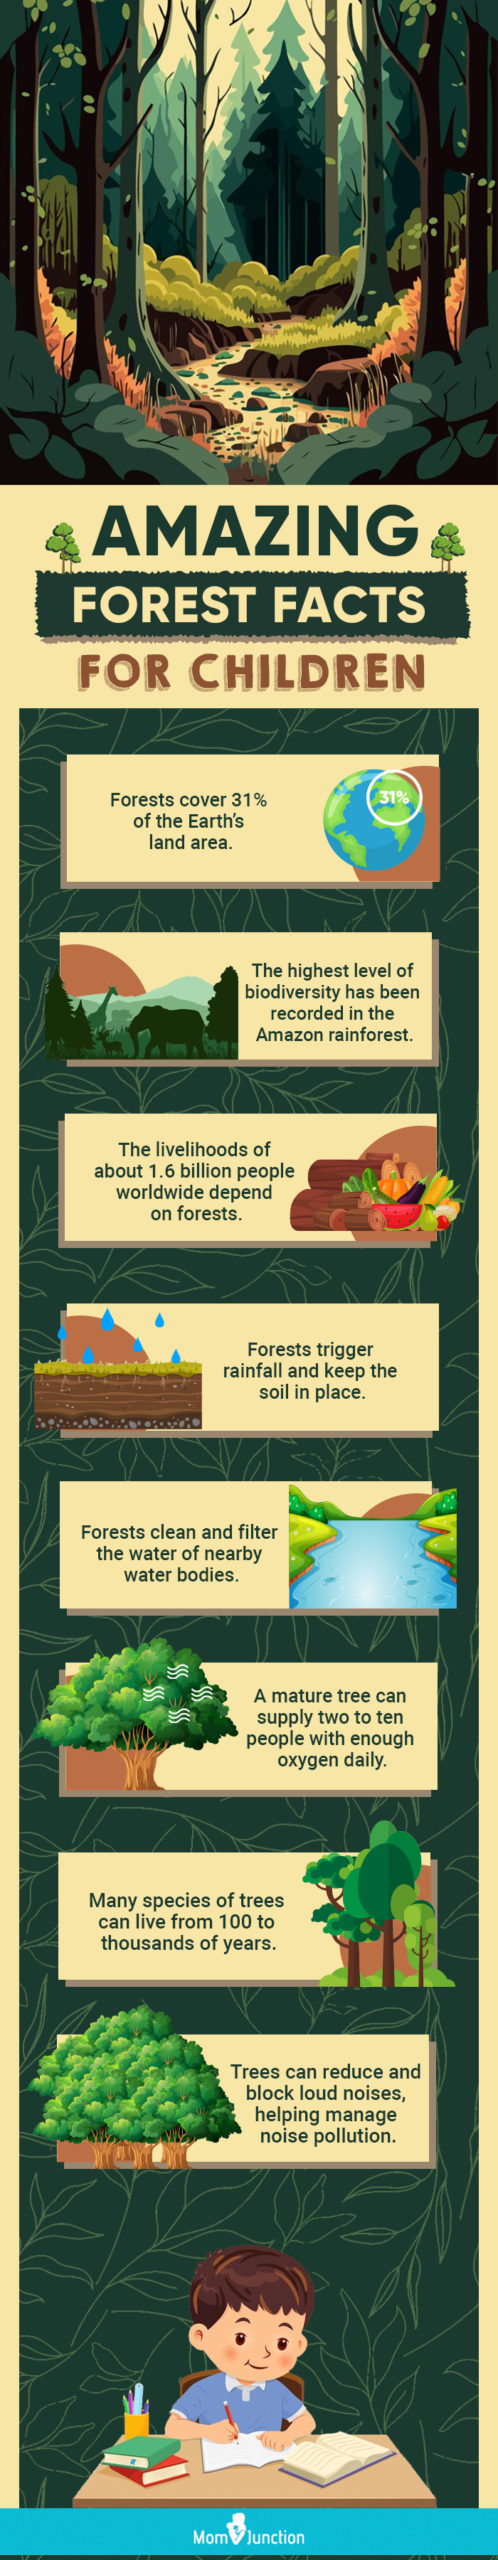 amazing forest facts for children (infographic)